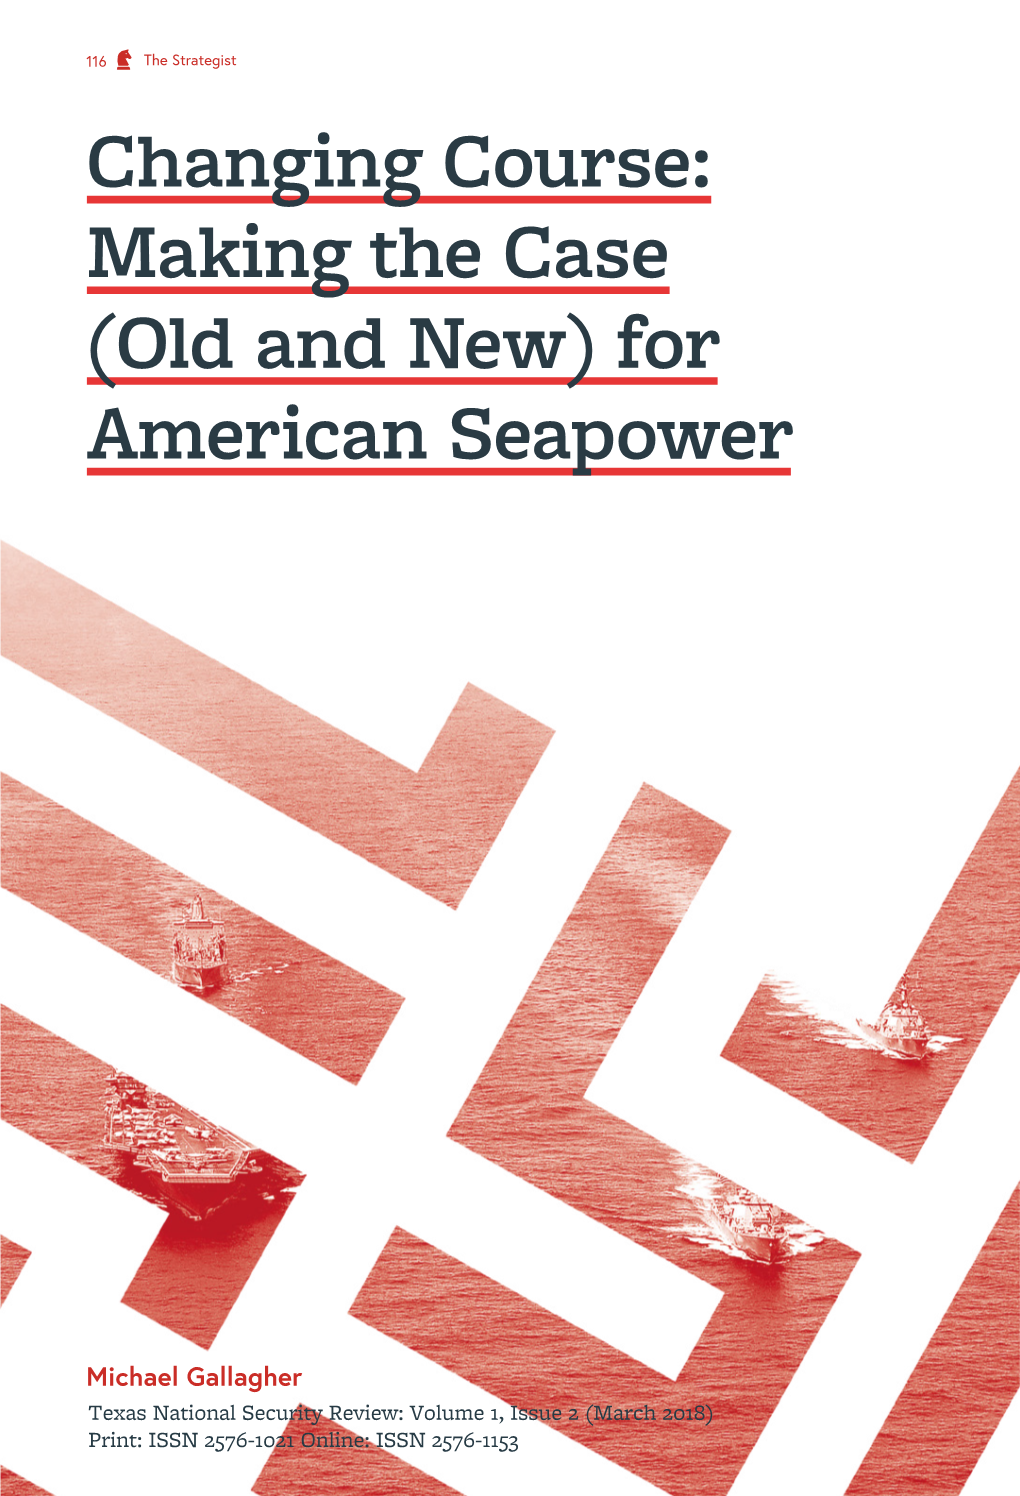 Changing Course: Making the Case (Old and New) for American Seapower